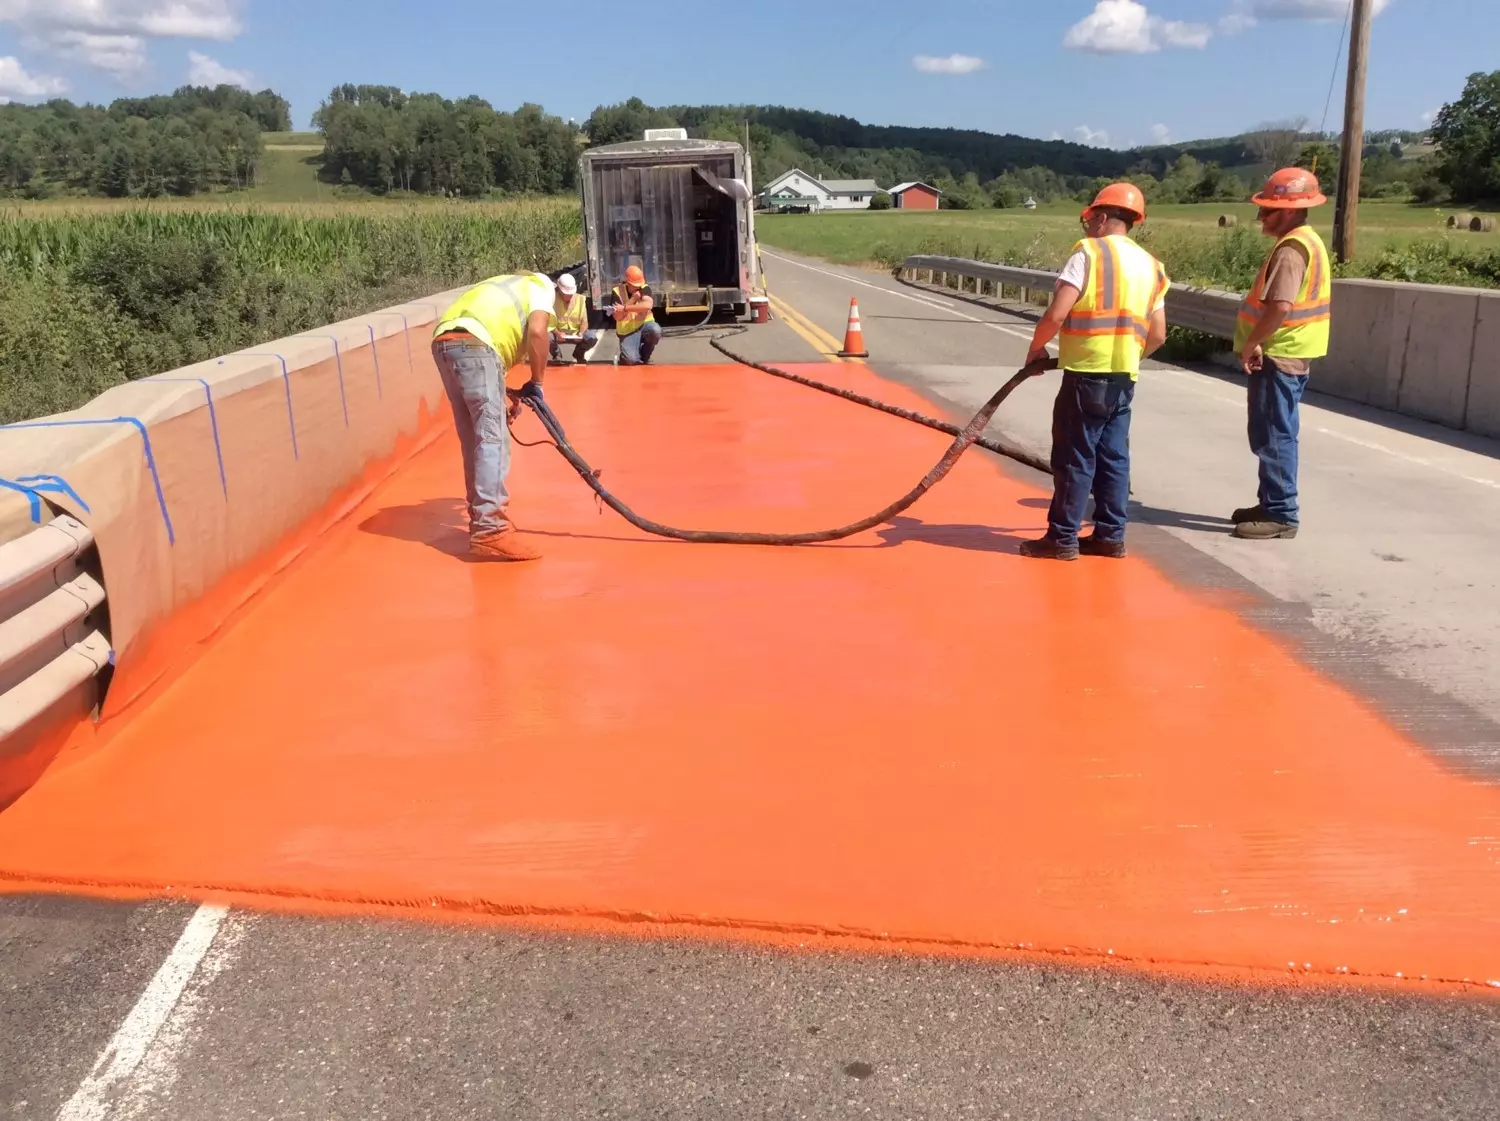 An image of three construction workers using a sprayer to apply an orange coating to a bridge deck while two construction workers inspect the coating in the background.